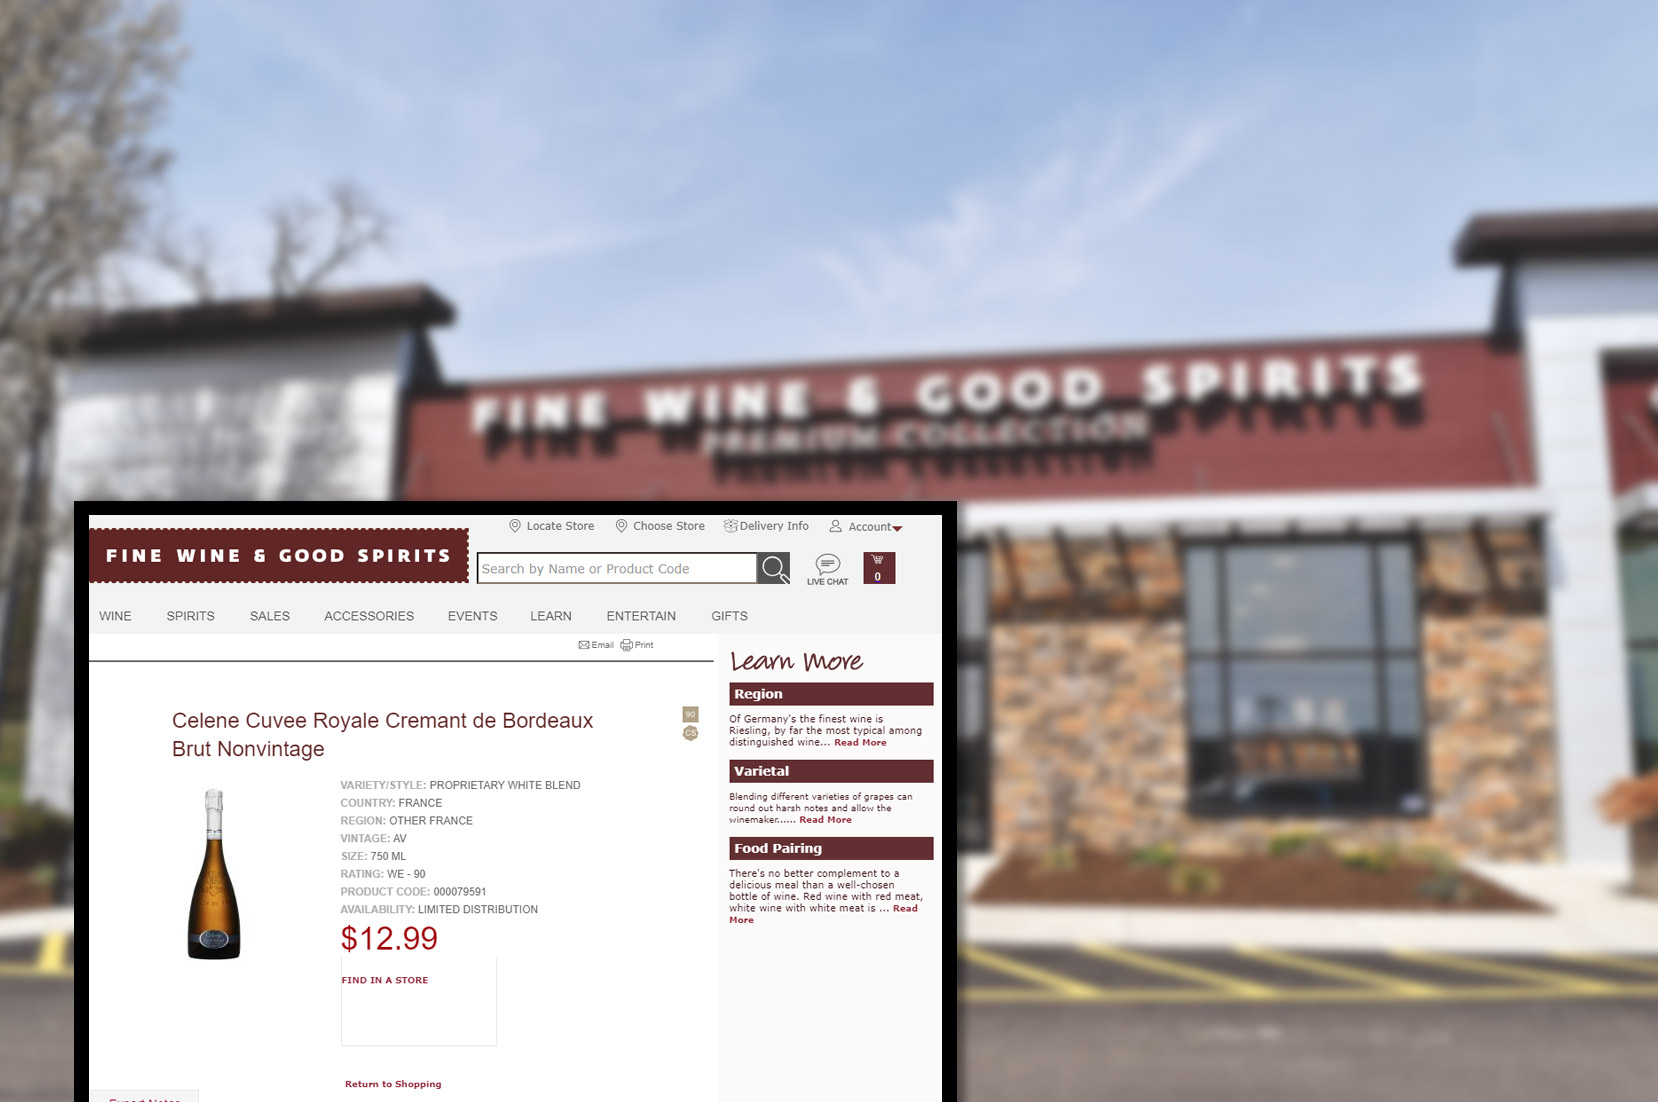 finewineandgoodspirits-comproduct-pricing-information-and-image-scraping-services